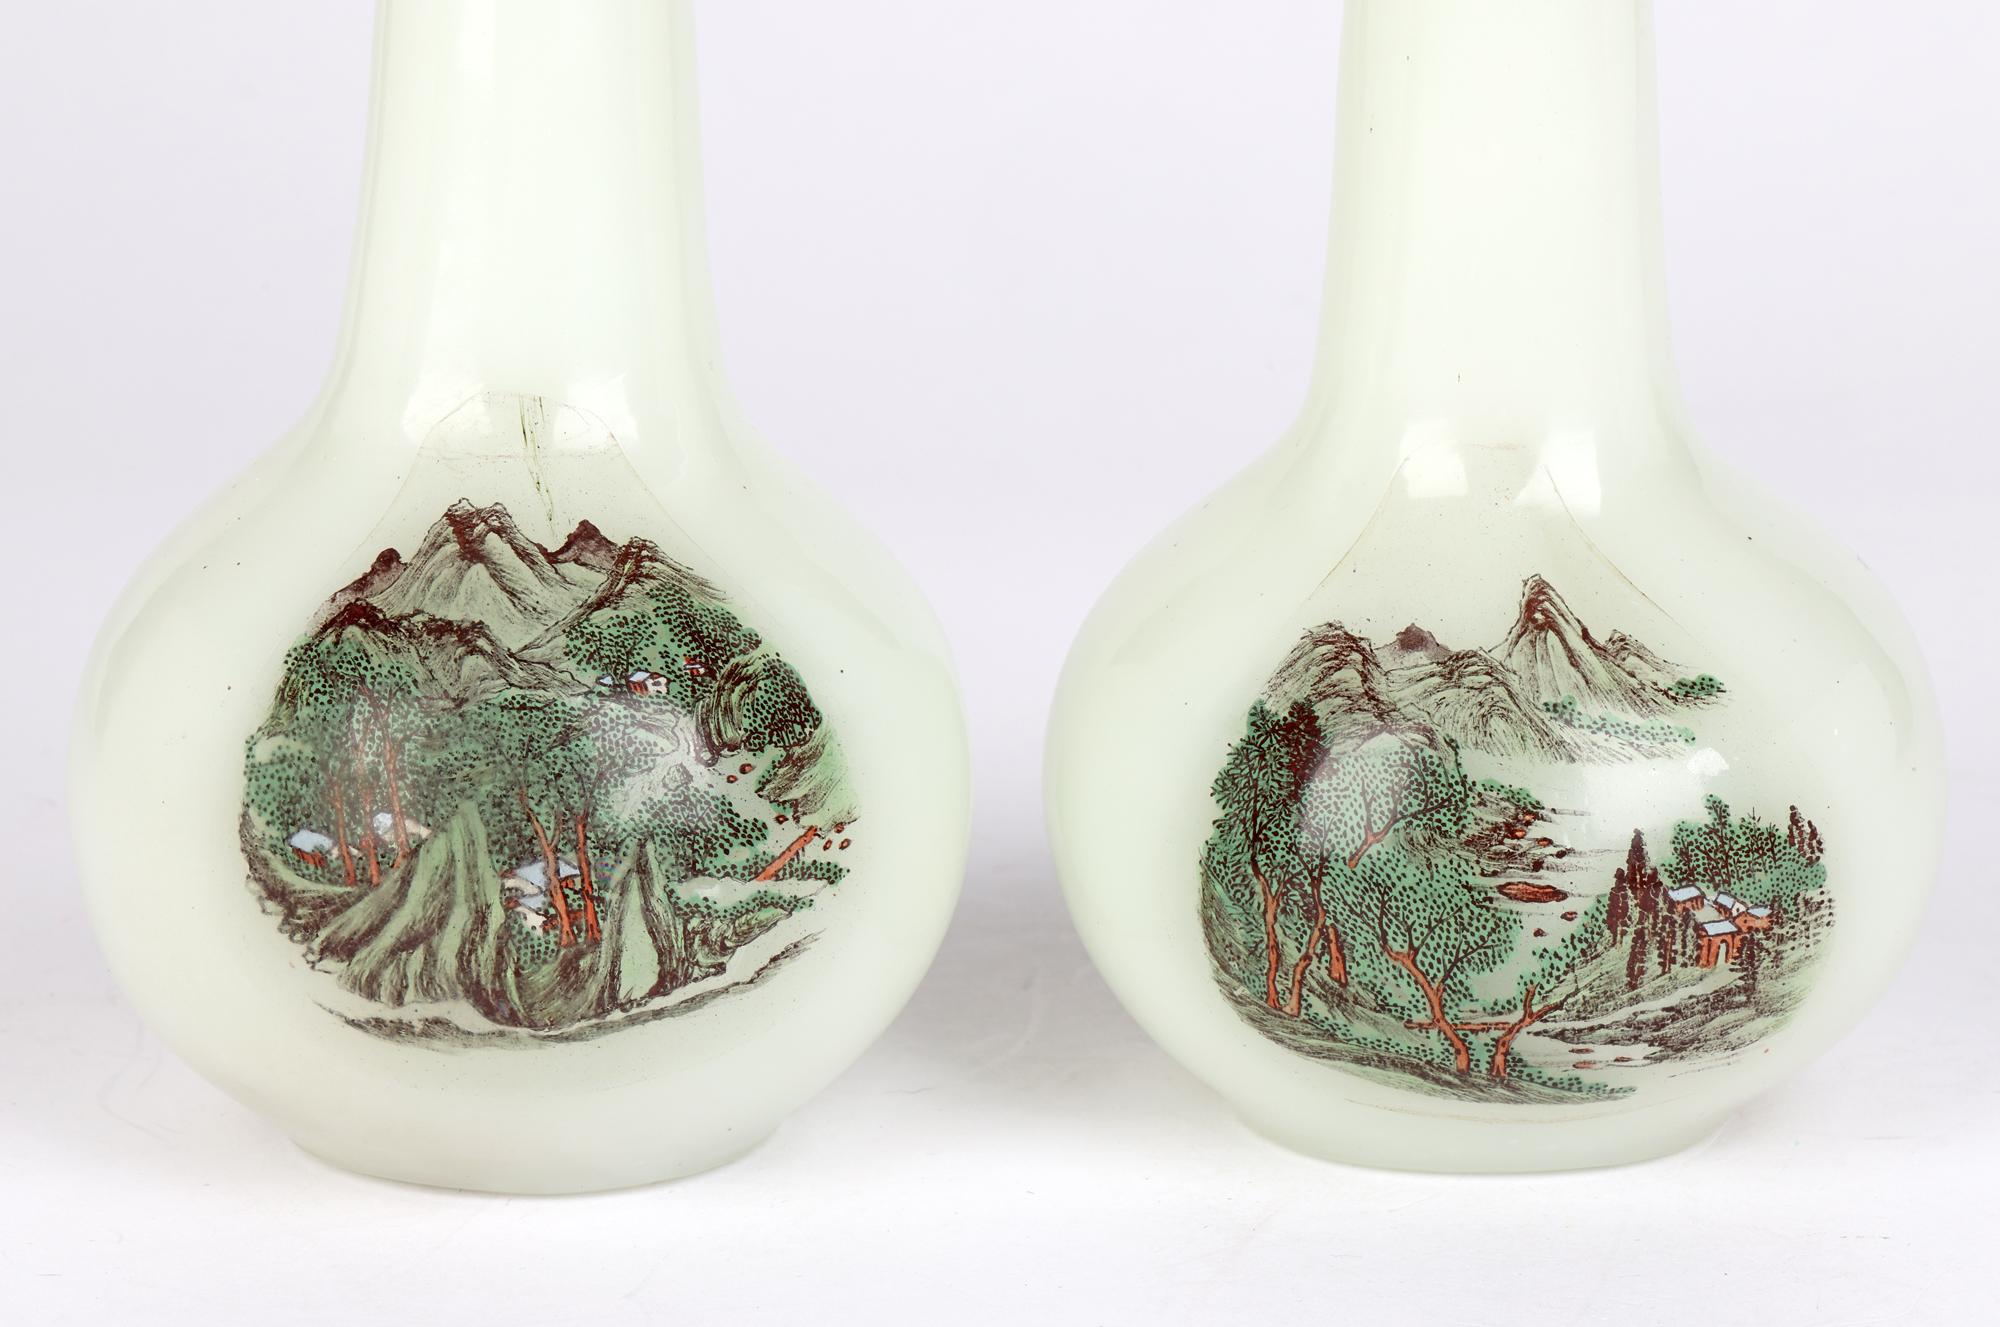 A fine and unusual pair antique Chinese Qing Peking glass vases finely hand decorated with landscape panels dating from the 19th century or possibly earlier. The vases are blown in an opaque colored glass standing on a narrow round foot and with a